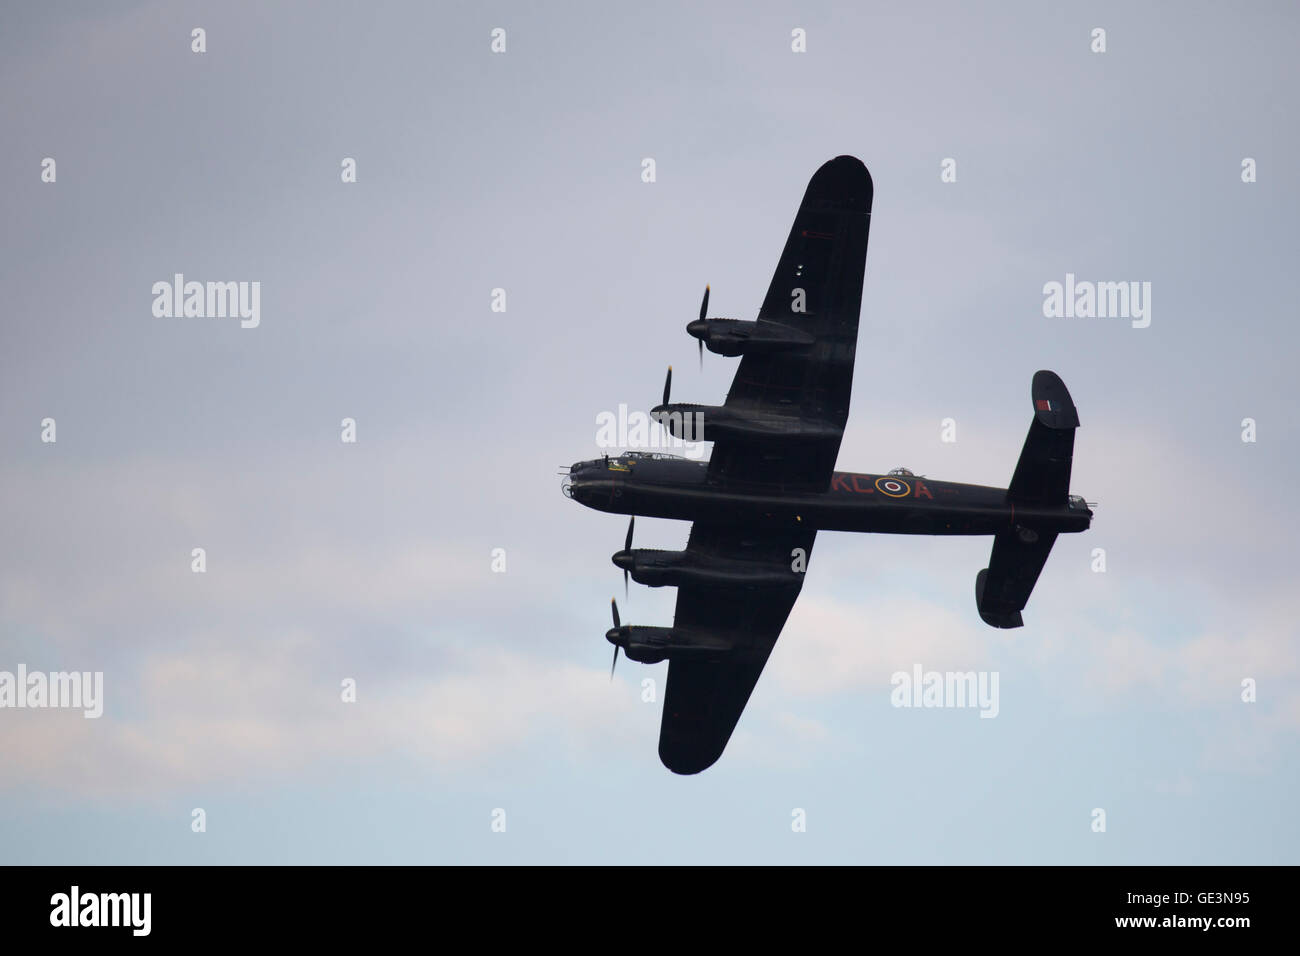 Sunderland, UK. 22nd July, 2016. A Lancaster bomber flies at the Sunderland International Airshow in Sunderland, England. The plane is part of the Battle of Britain Memorial Flight. The annual event attracts up to one million visitors a year and has taken place since 1988. Credit:  Stuart Forster/Alamy Live News Stock Photo